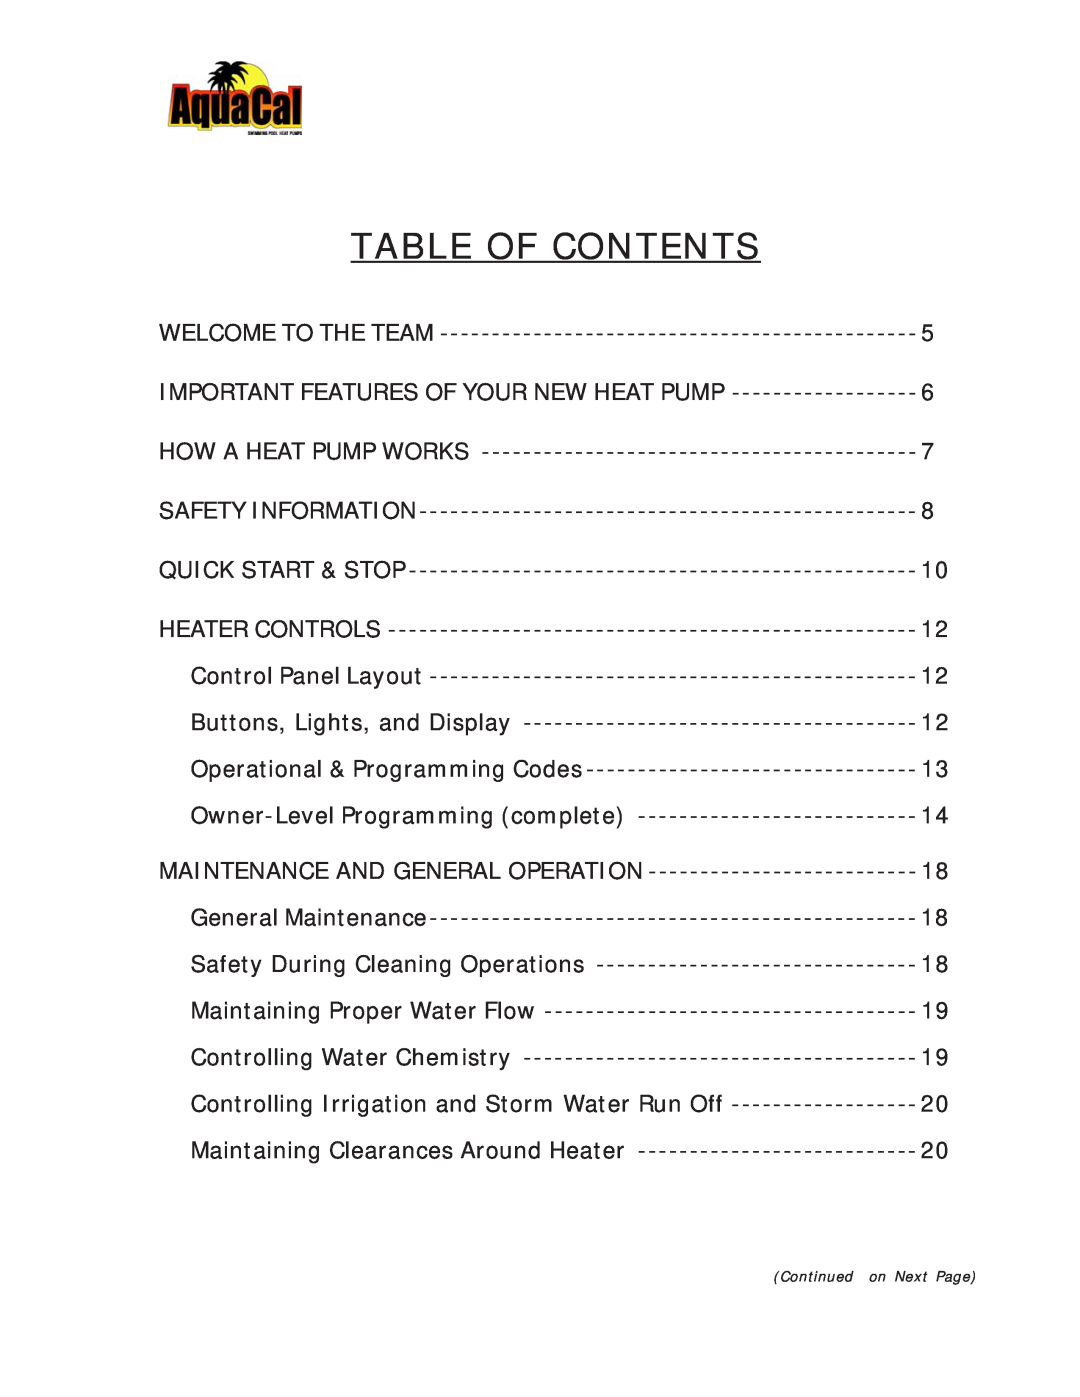 Aquacal 100 owner manual Table Of Contents 